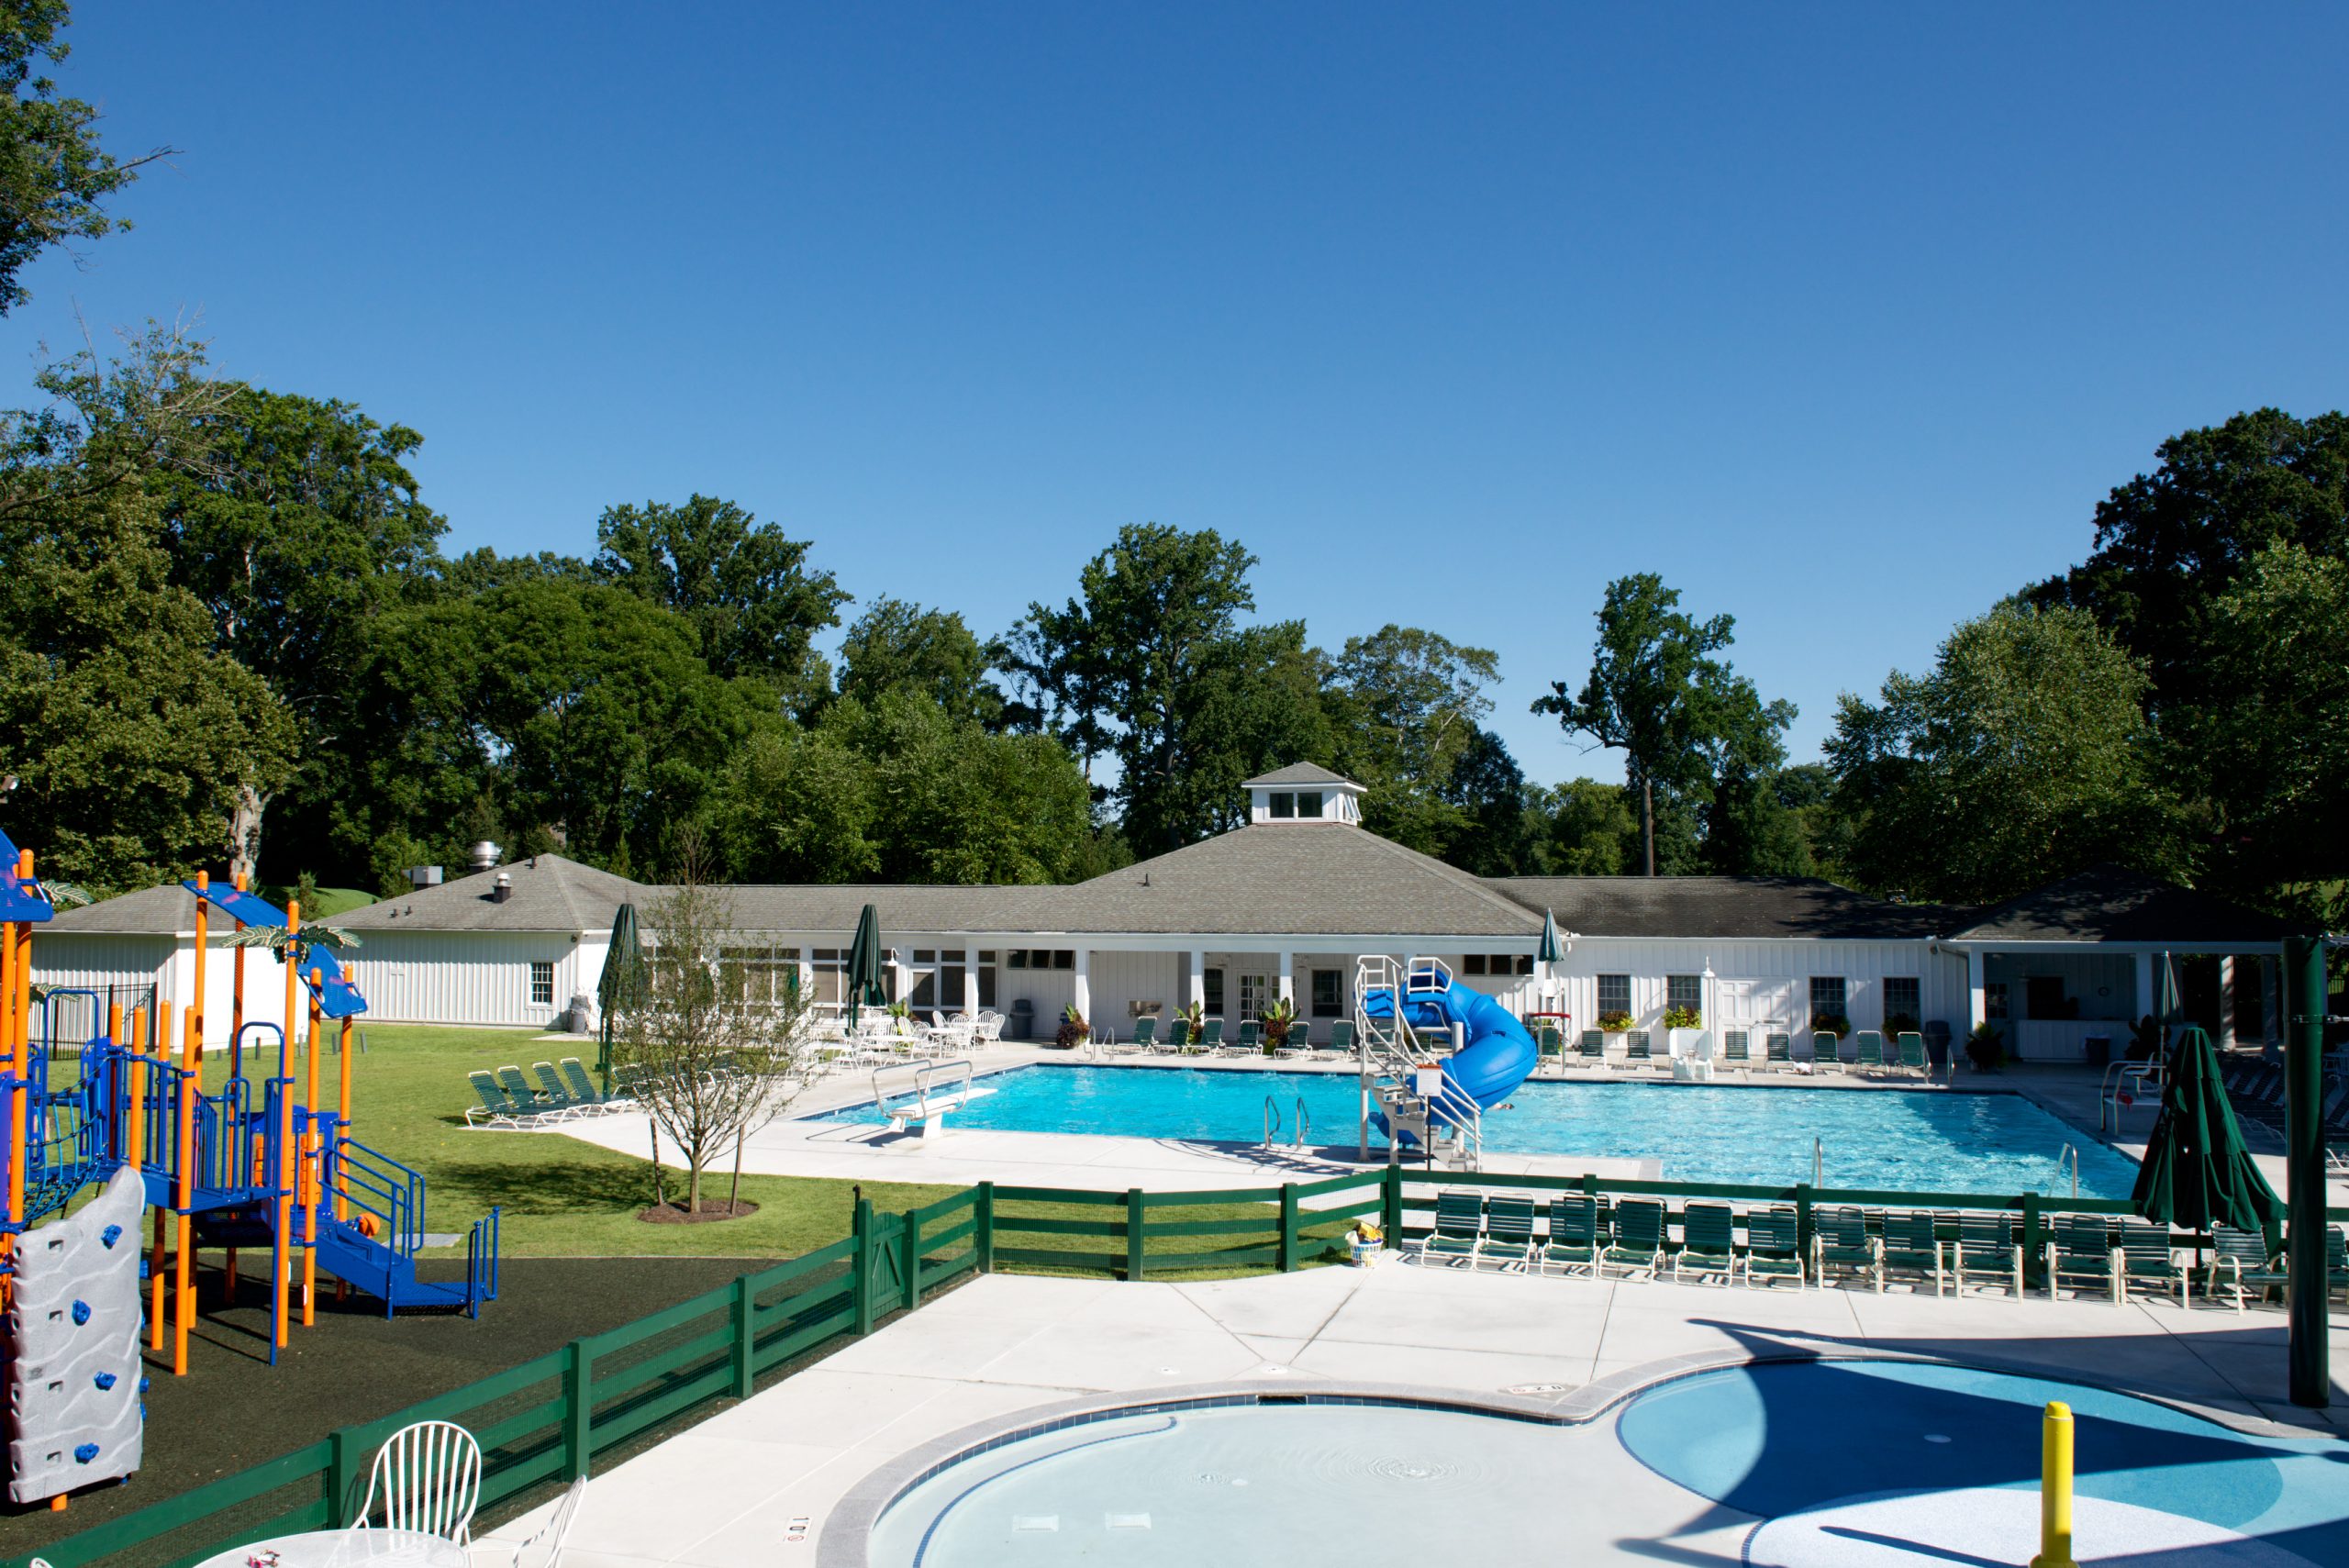 The pool and pool house at Elkridge Country Club in Baltimore, Maryland renovated by Delbert Adams Construction Group, Commercial Construction division.